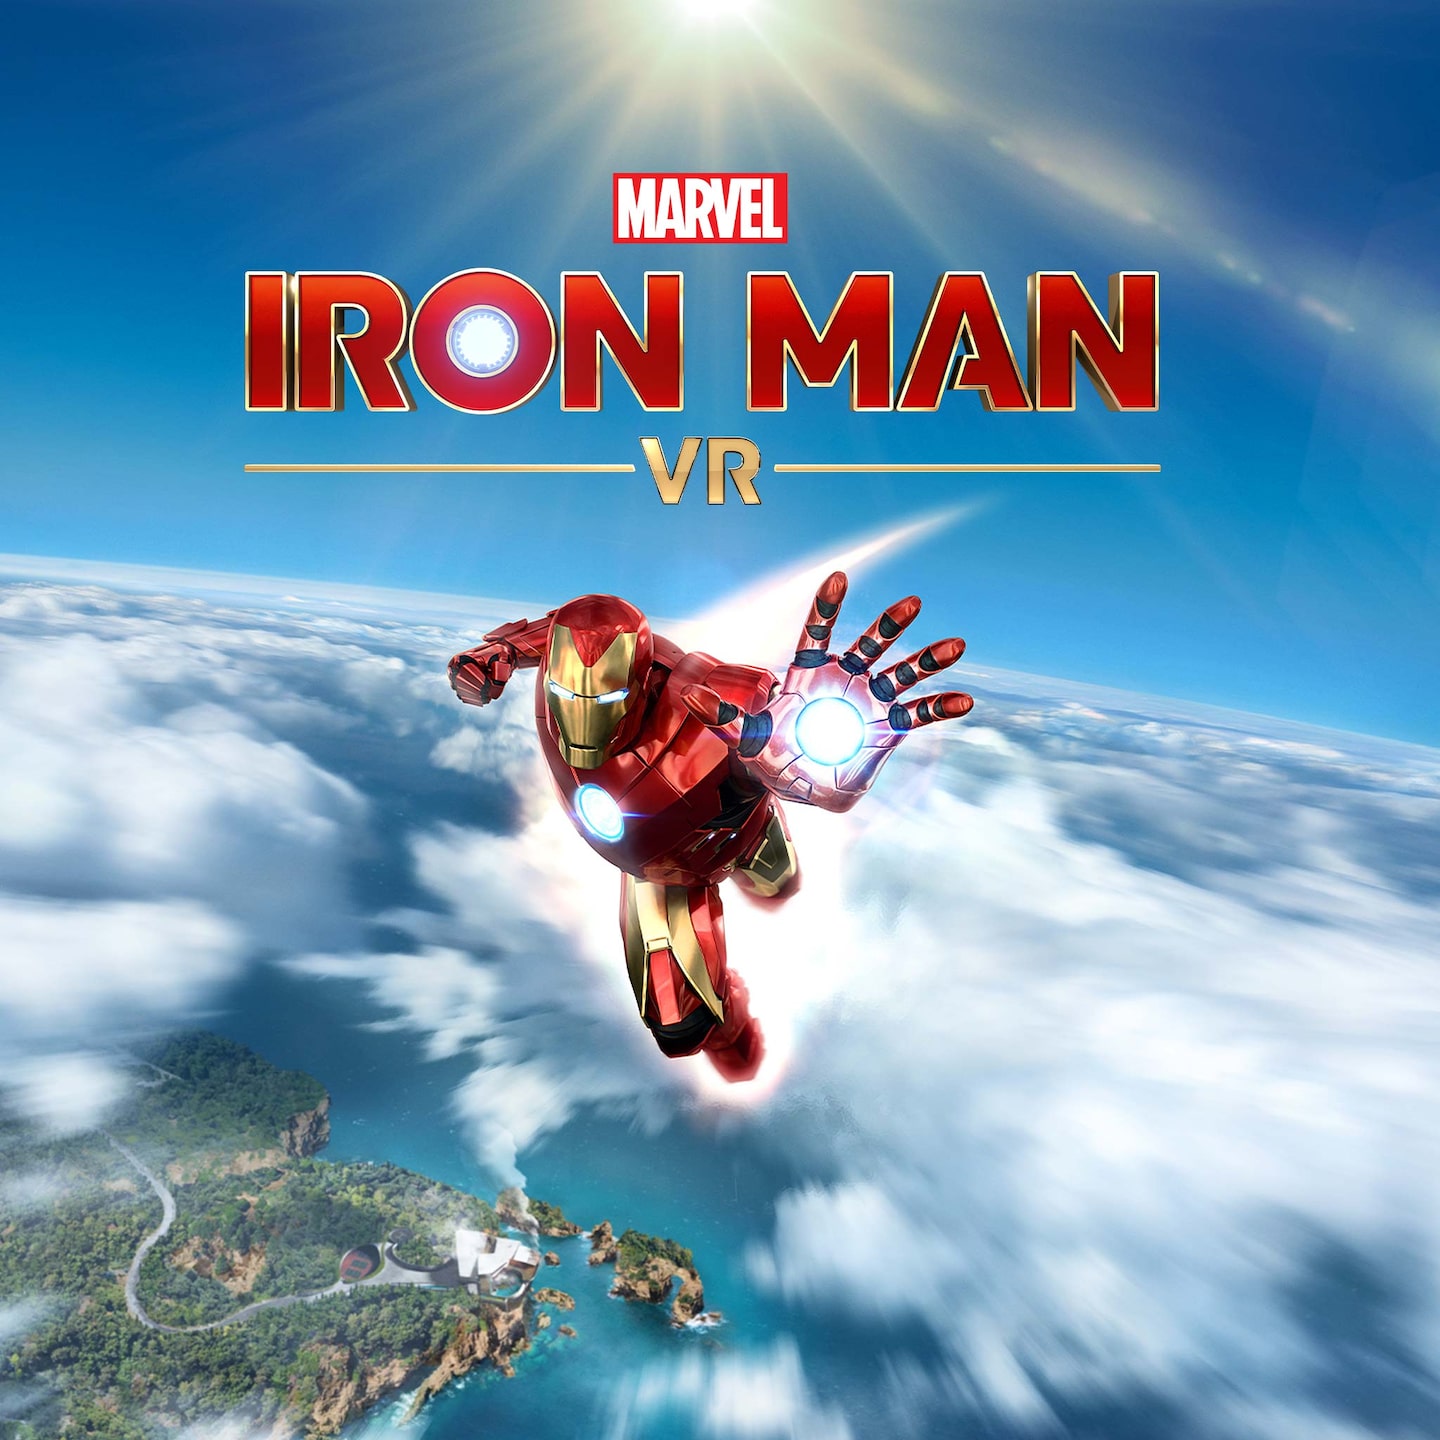 Insomniac Wolverine Spiderman 3 Ea has a slew of marvel games Ironman